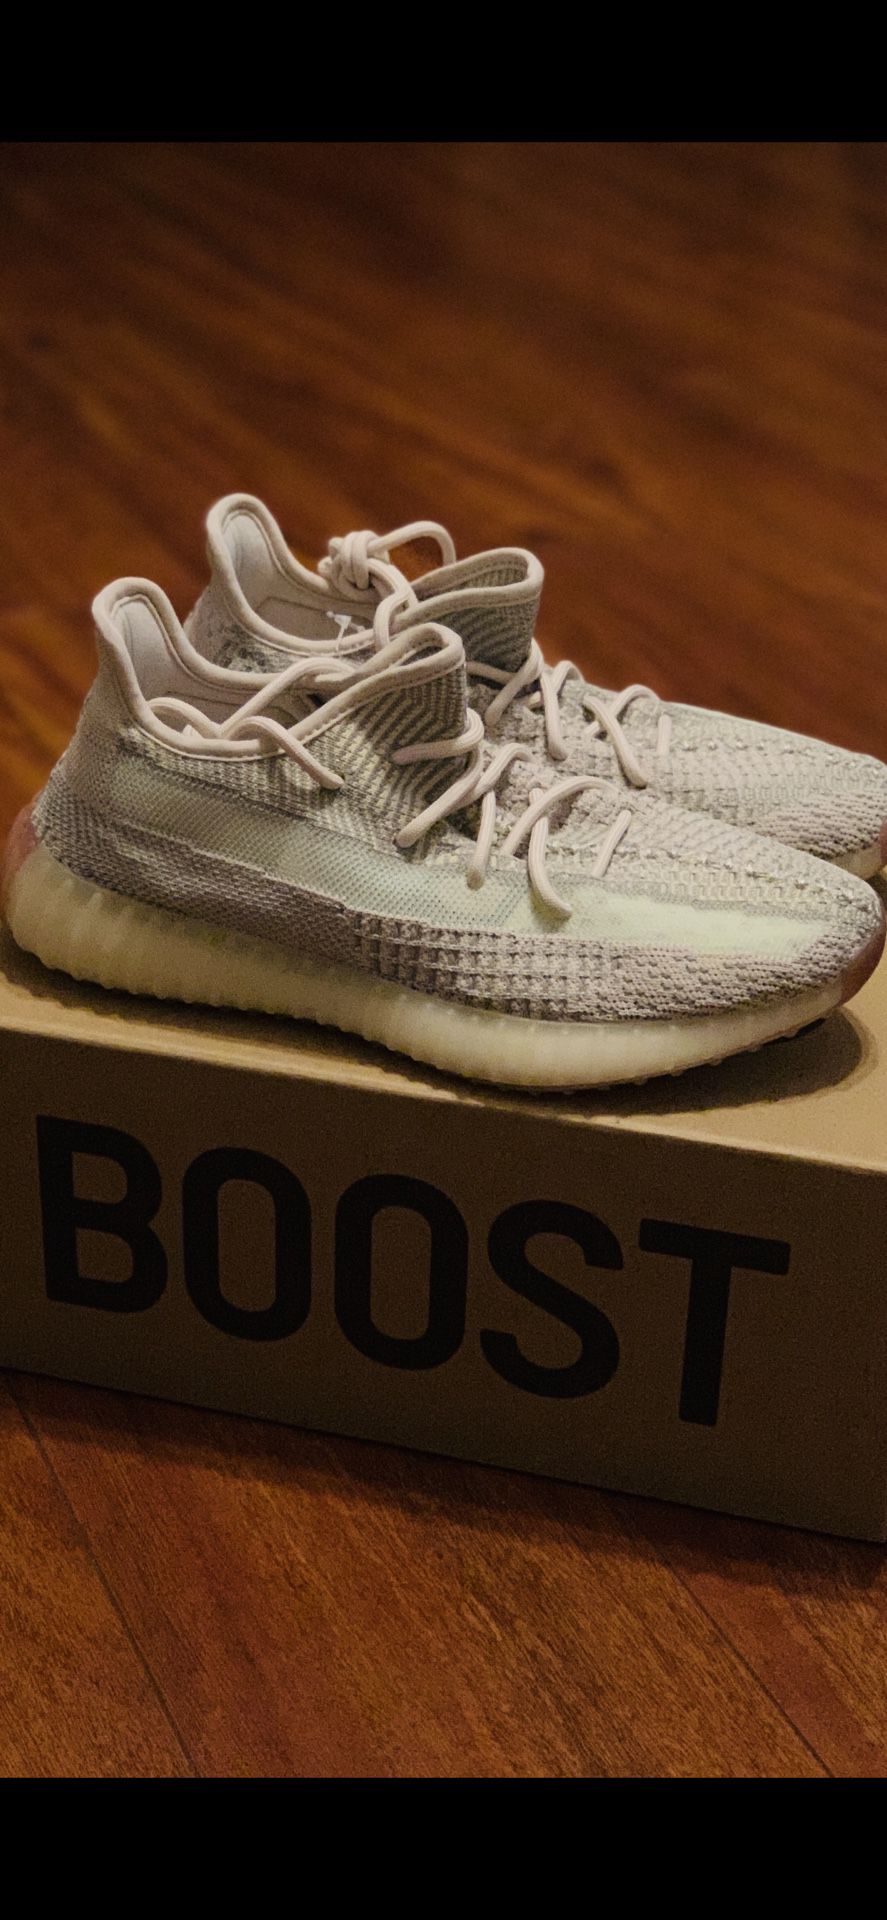 Adidas Yeezy Boost 350 v2 Citrin Non-Reflective Size 7. 100% Authentic